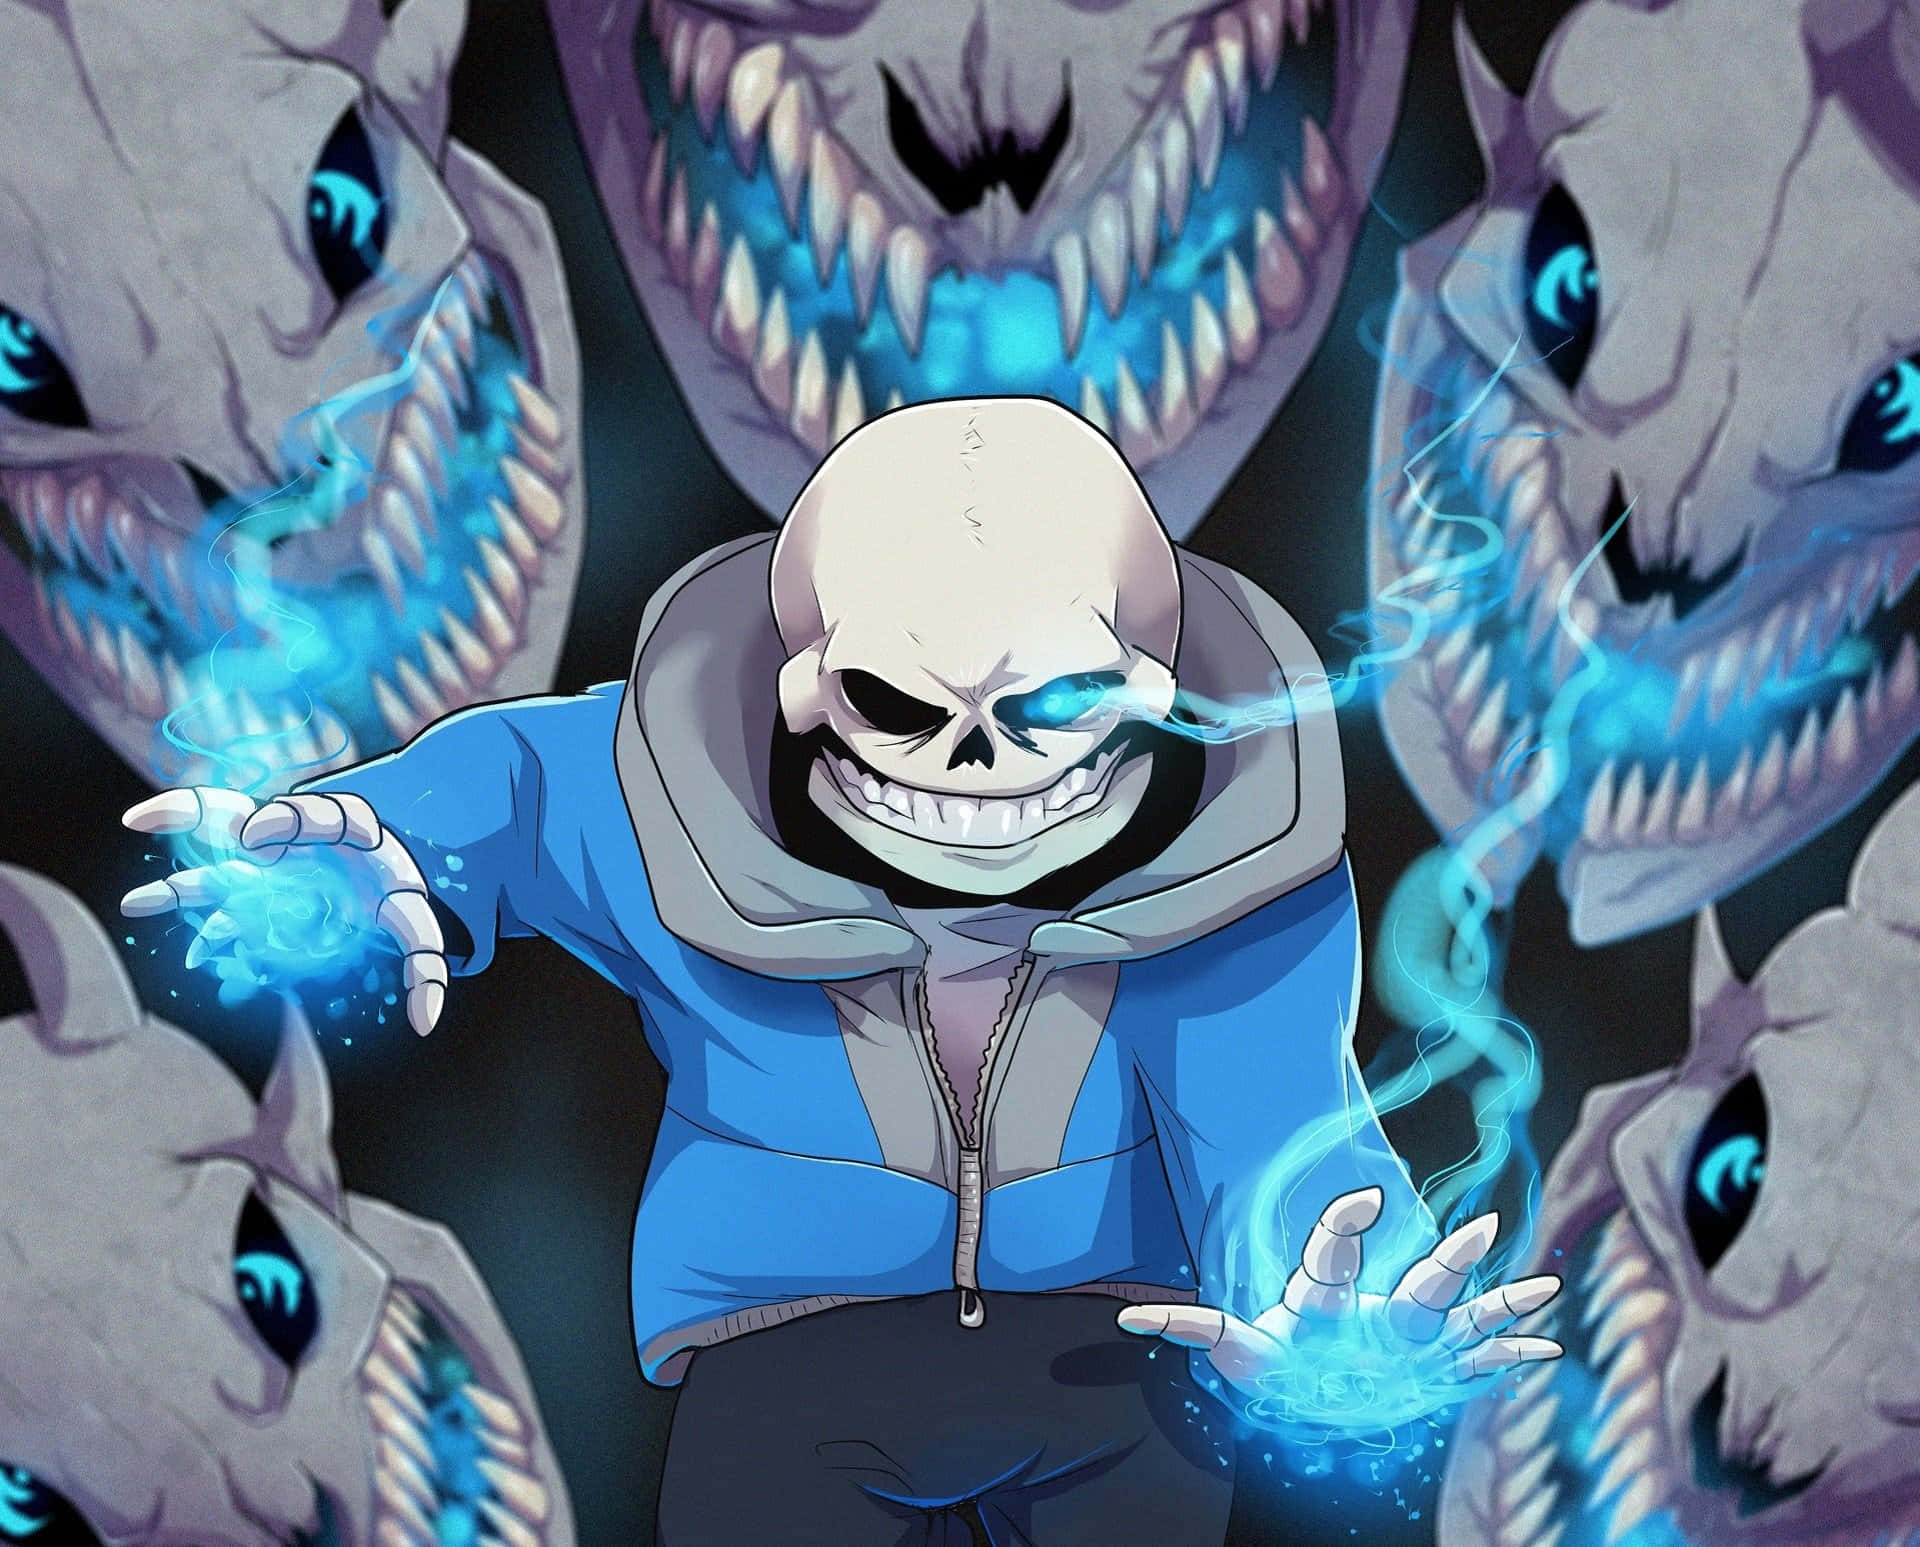 Sans, the comical skeleton character from the game, high-definition background